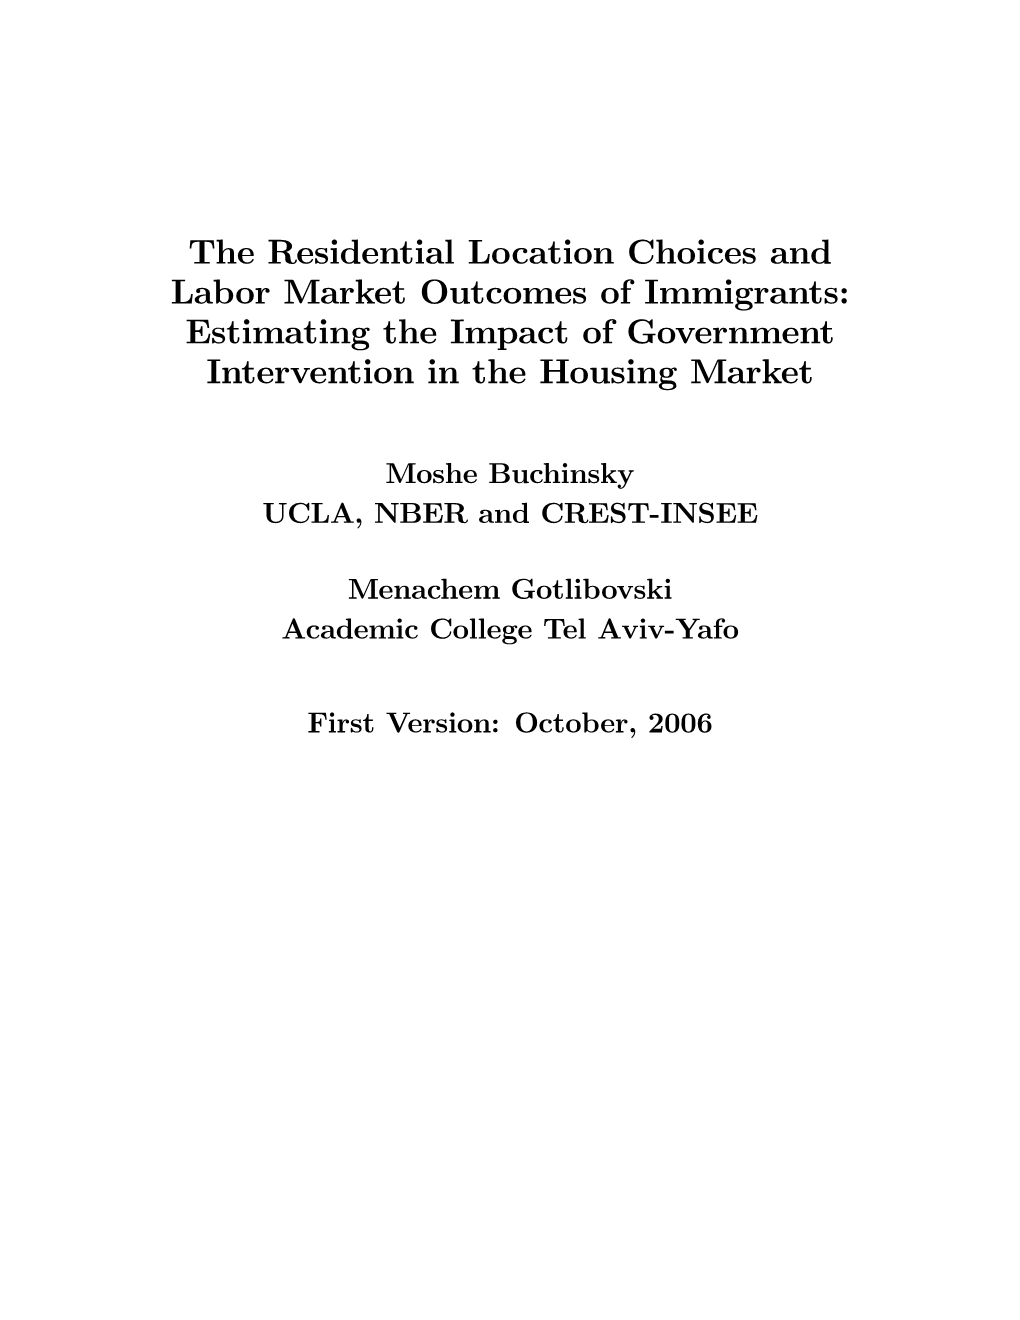 The Residential Location Choices and Labor Market Outcomes of Immigrants: Estimating the Impact of Government Intervention in the Housing Market